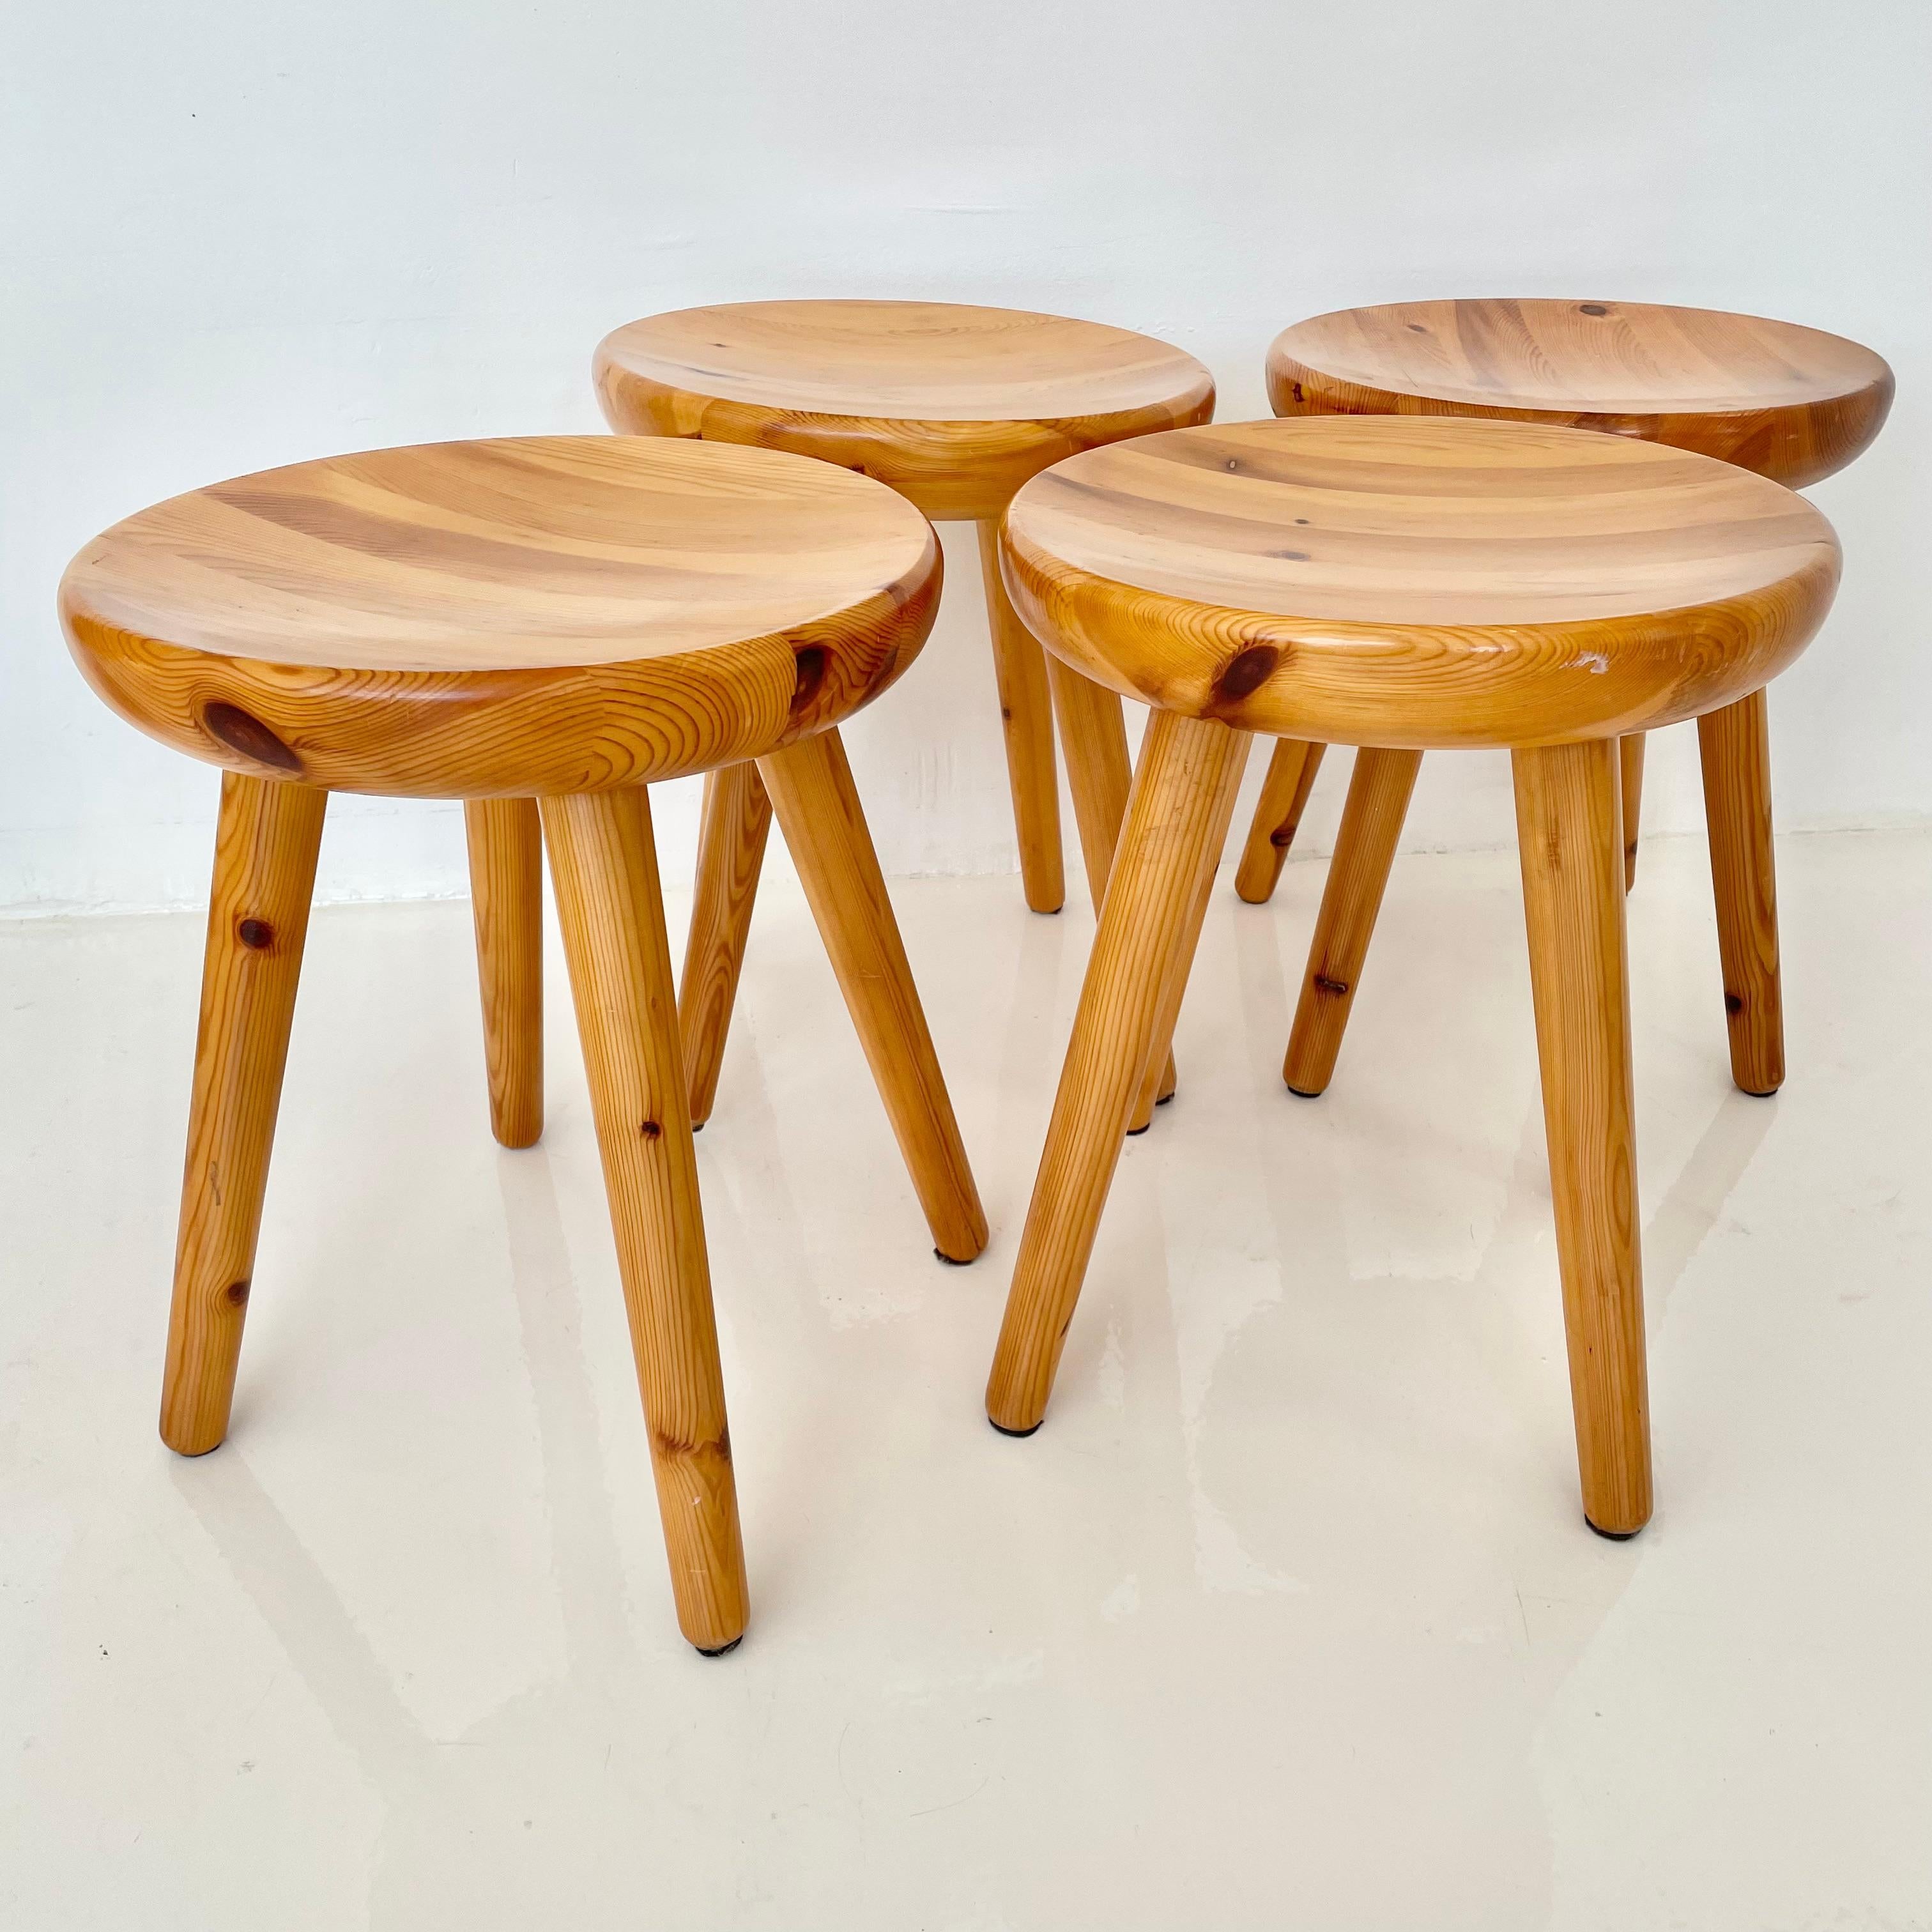 Charlotte Perriand Style Pine Stools In Good Condition For Sale In Los Angeles, CA